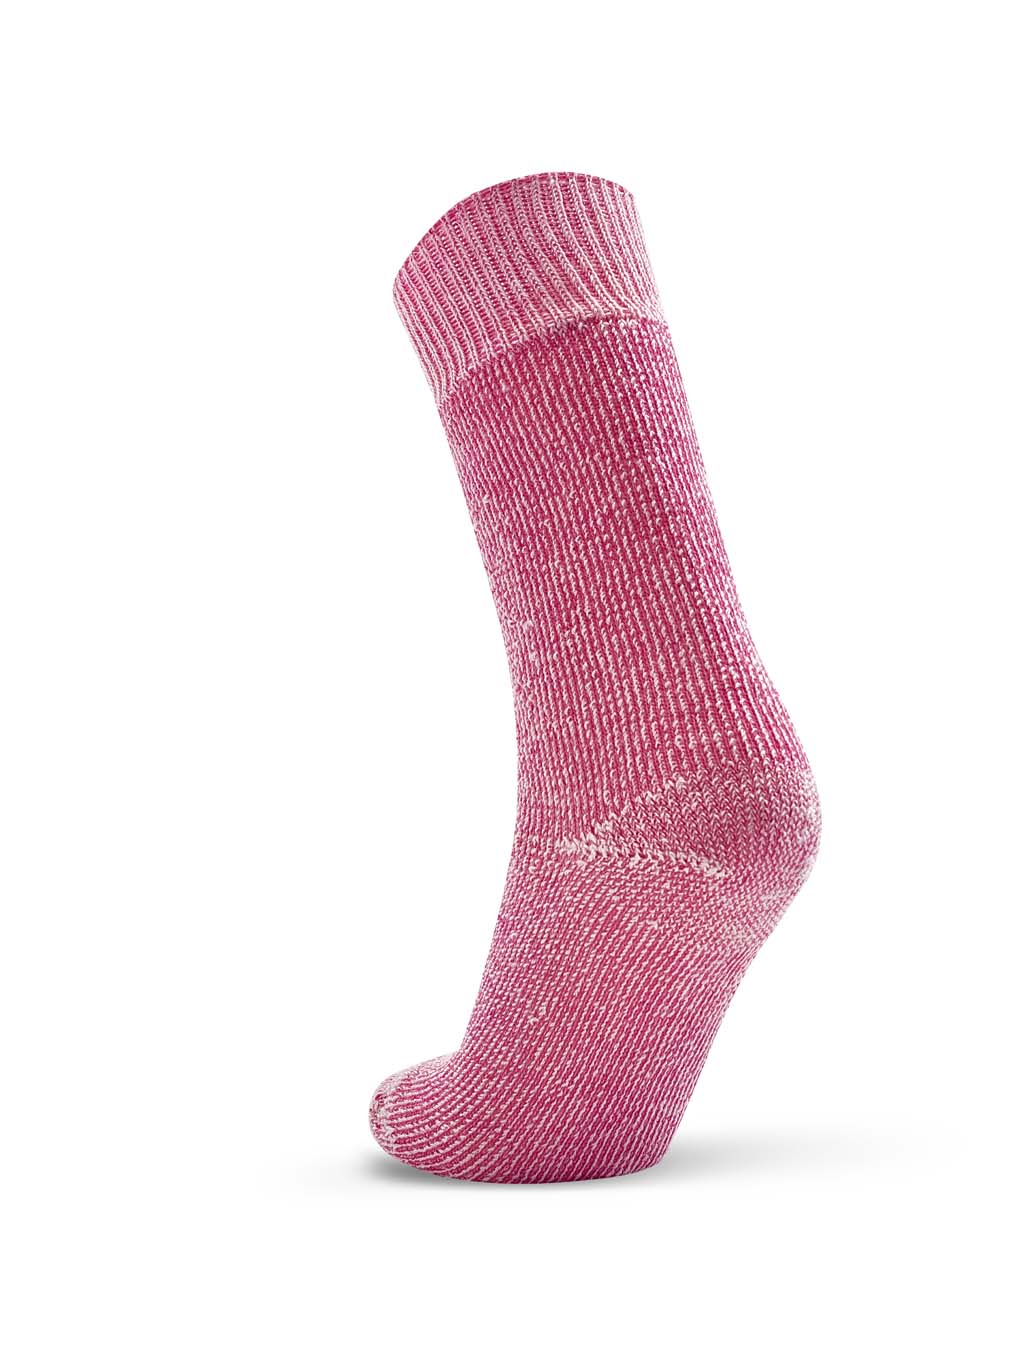 High Country Socks 3 Pack - Pink